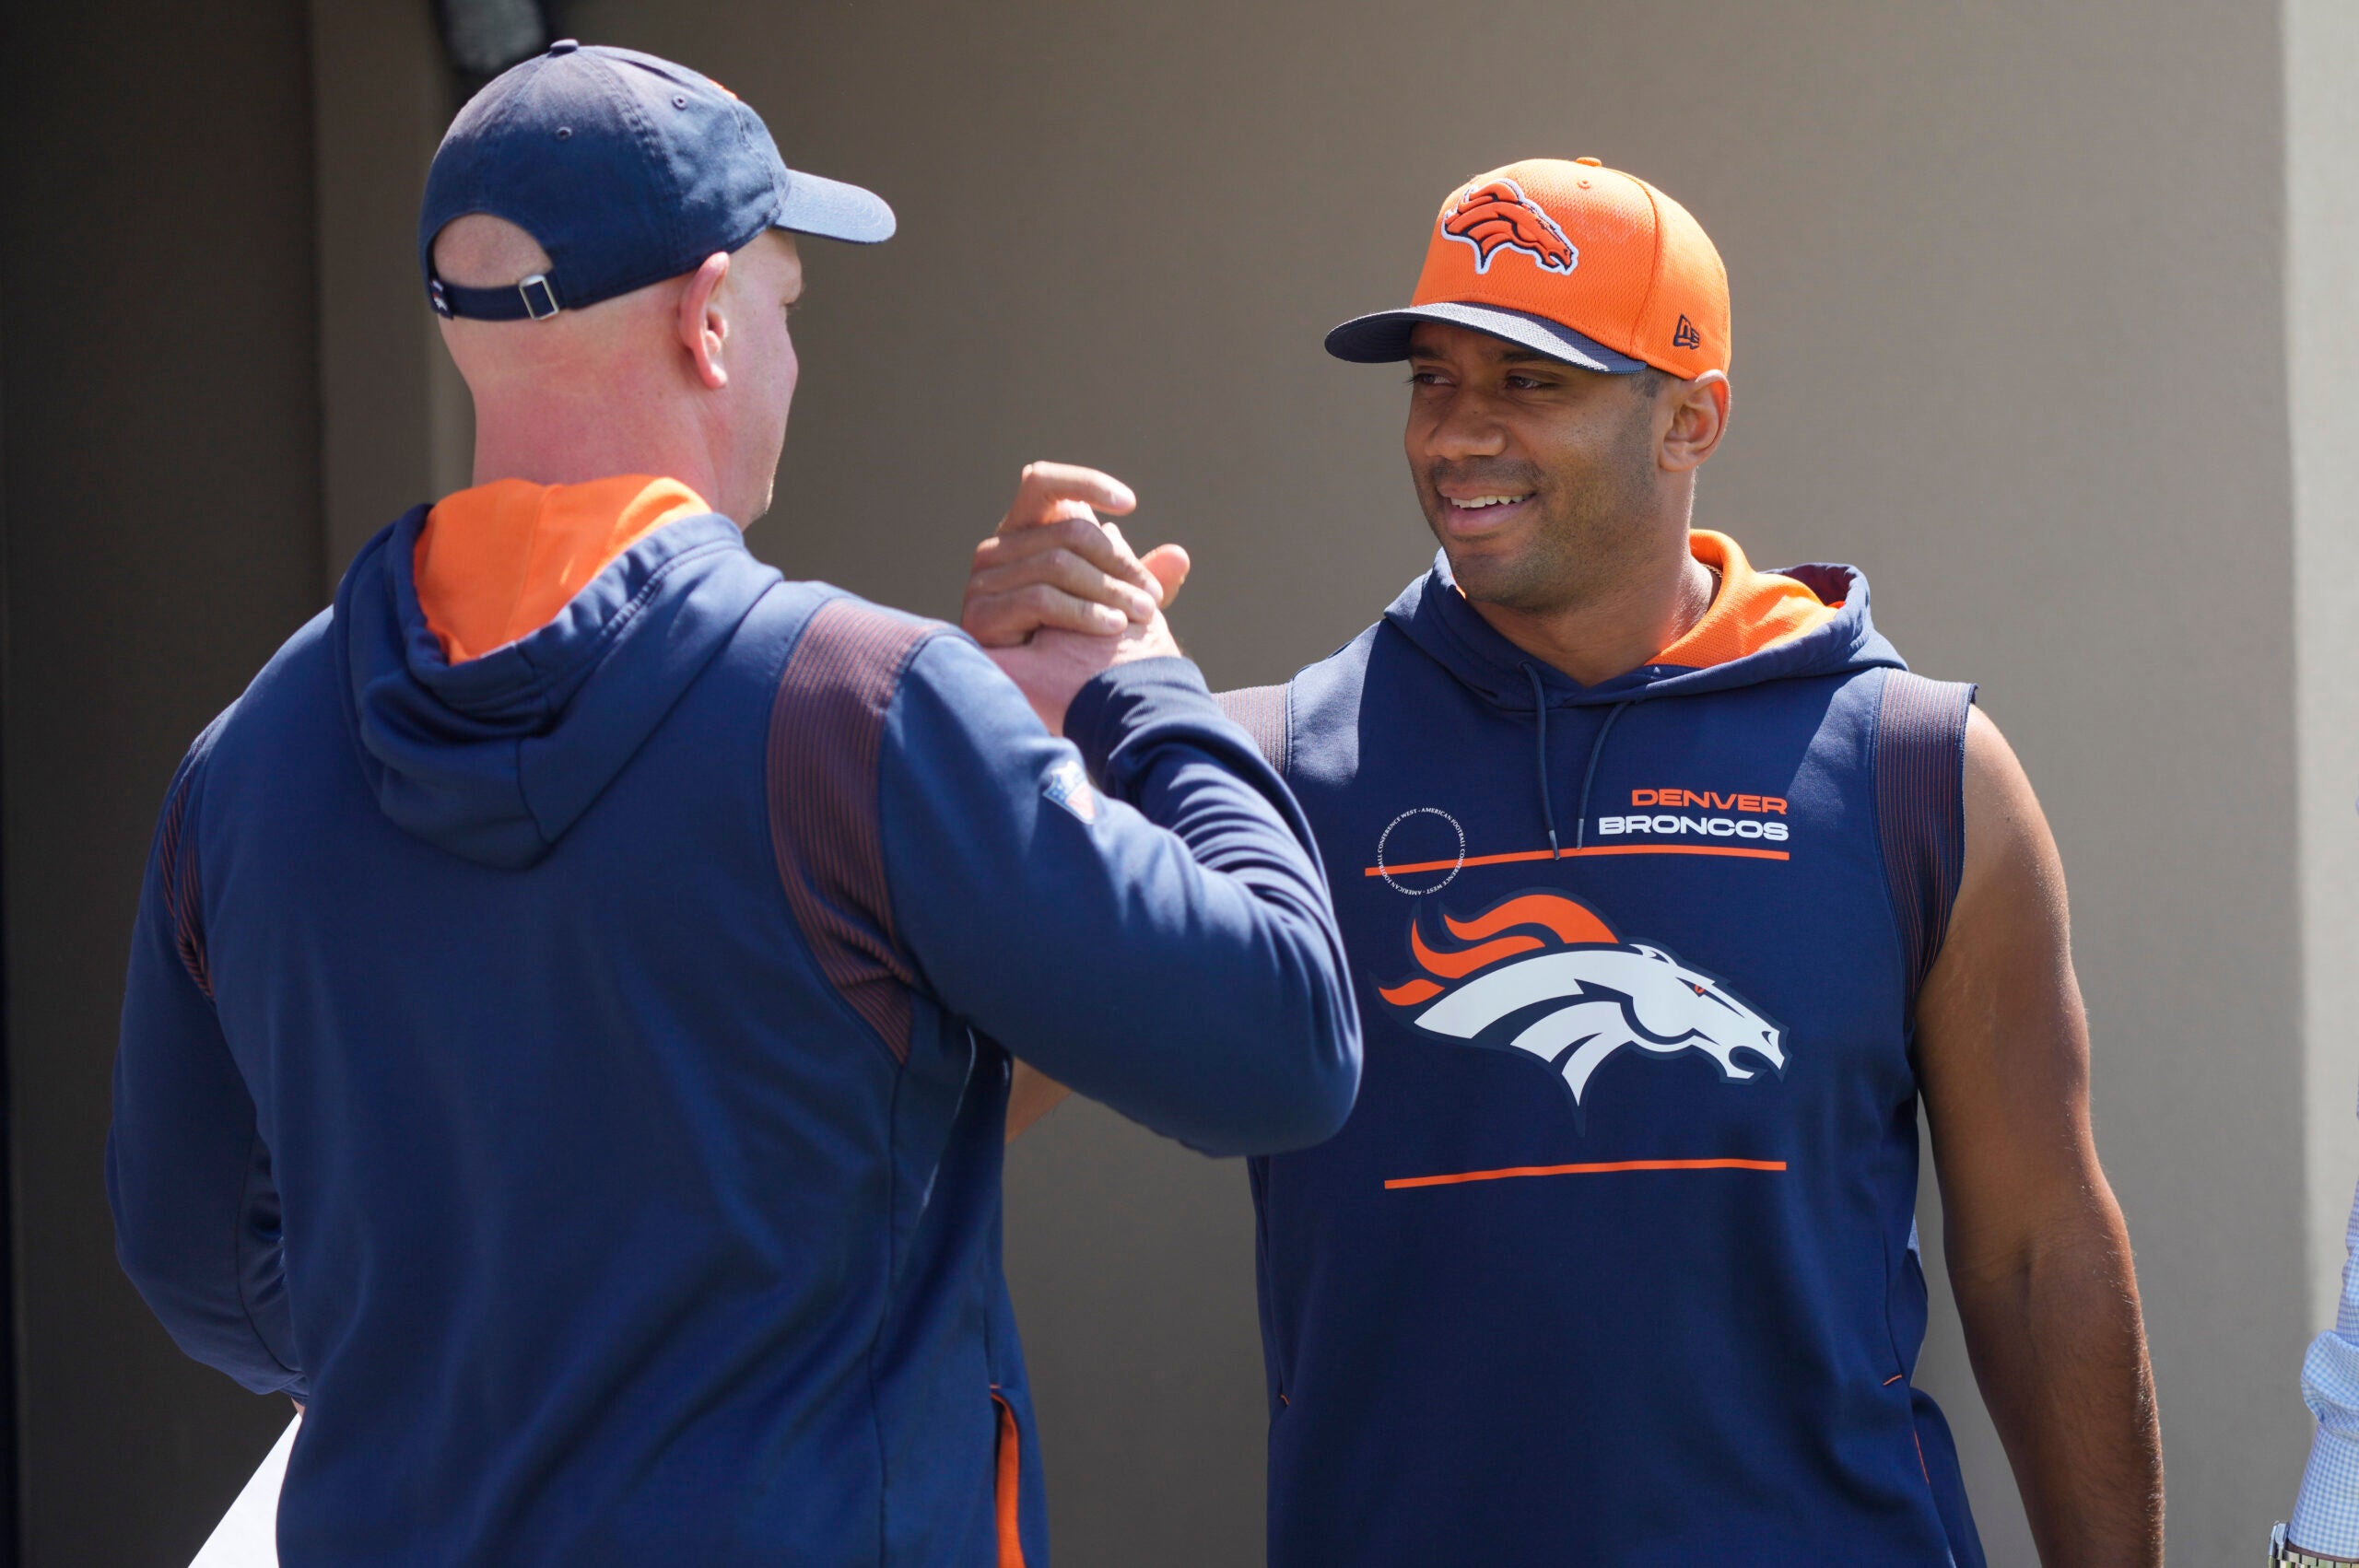 Denver Broncos head coach Nathaniel Hackett, left, greets quarterback Russell Wilson as he heads to a news conference before the NFL football team's practice Thursday, Sept. 8, 2022, at the Broncos' headquarters in Centennial, Colo. The Broncos open the NFL season Monday night against the Seahawks in Seattle.